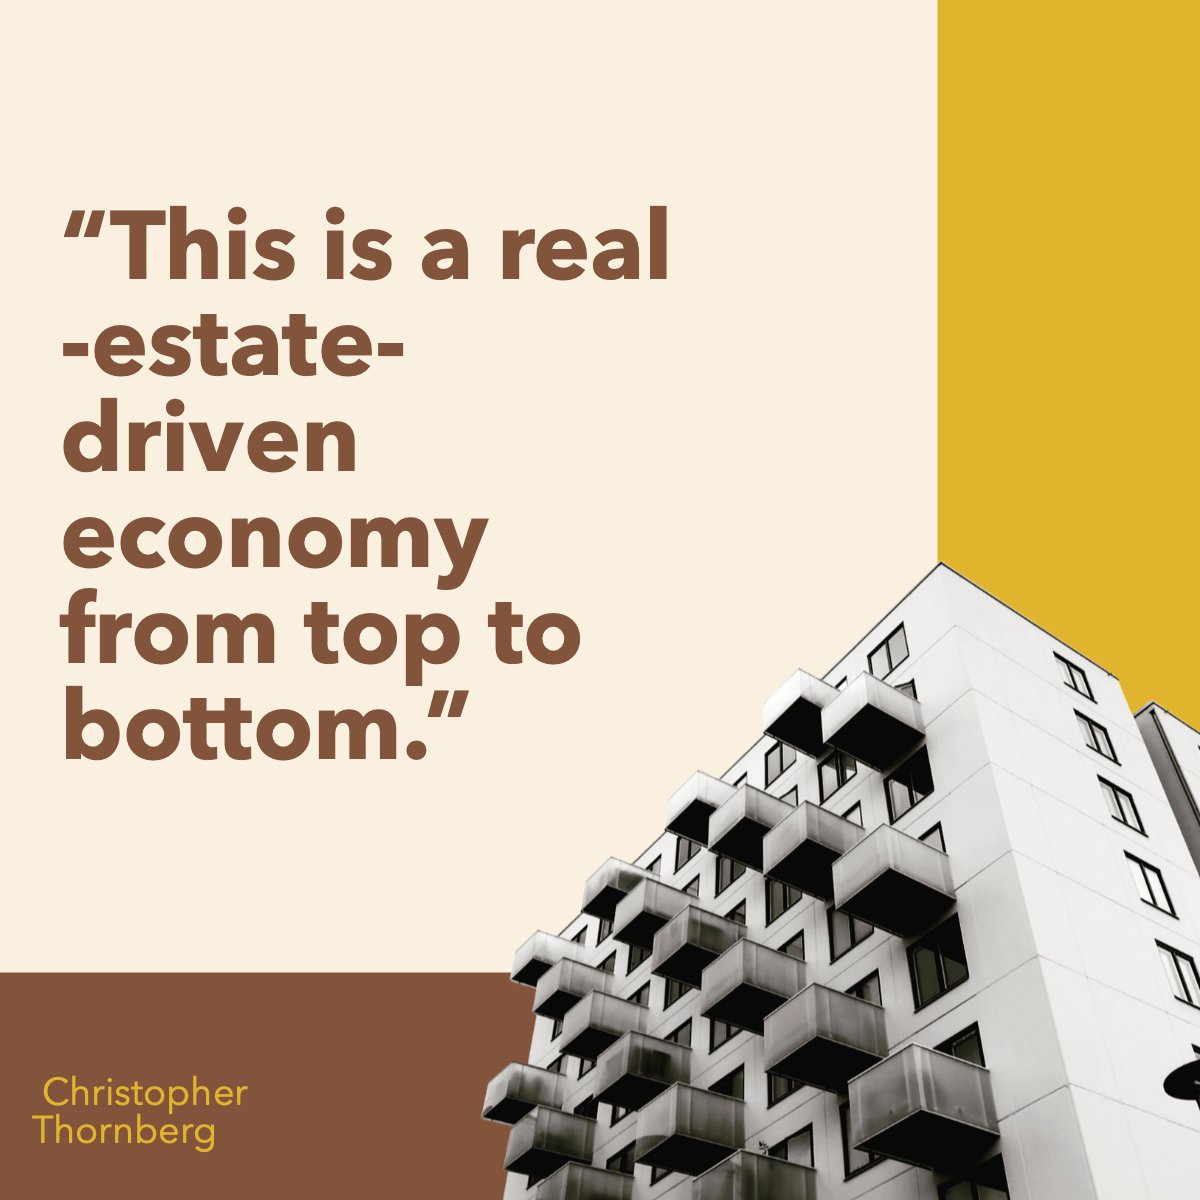 'This is a real-estate-driven economy from top to bottom.' — Christopher Thornberg 📖 #quoteoftheday #quotestagram #lifequotes #realestate #quotes #realestate